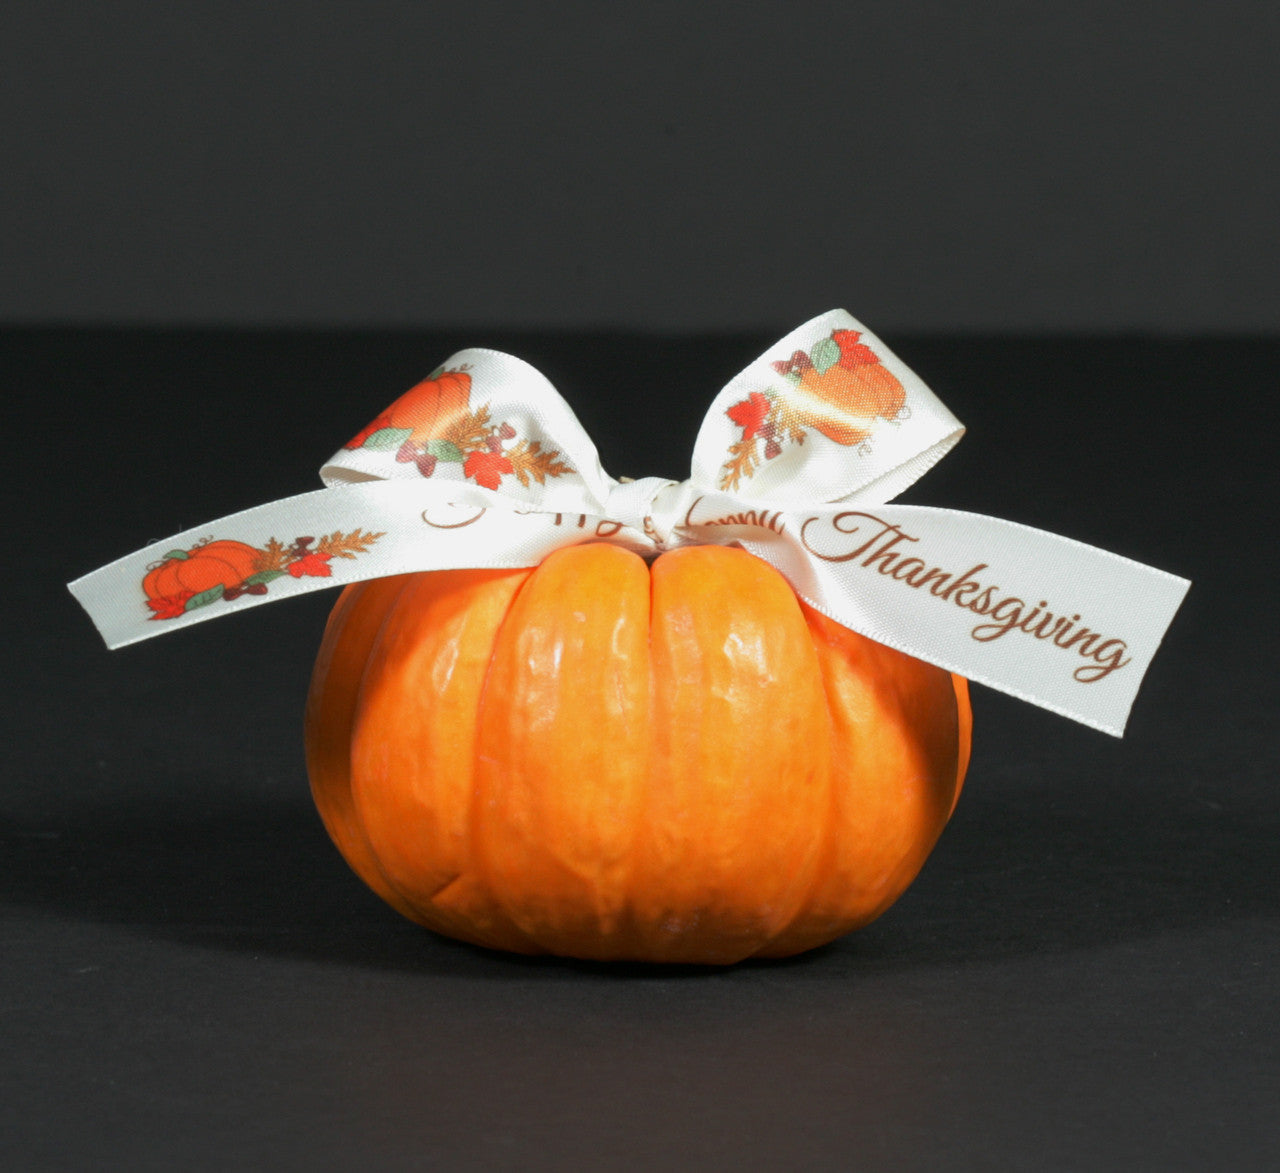 Add our Happy Thanksgiving ribbon to a mini pumpkin and add it to your table for a wonderful Fall tablescape.